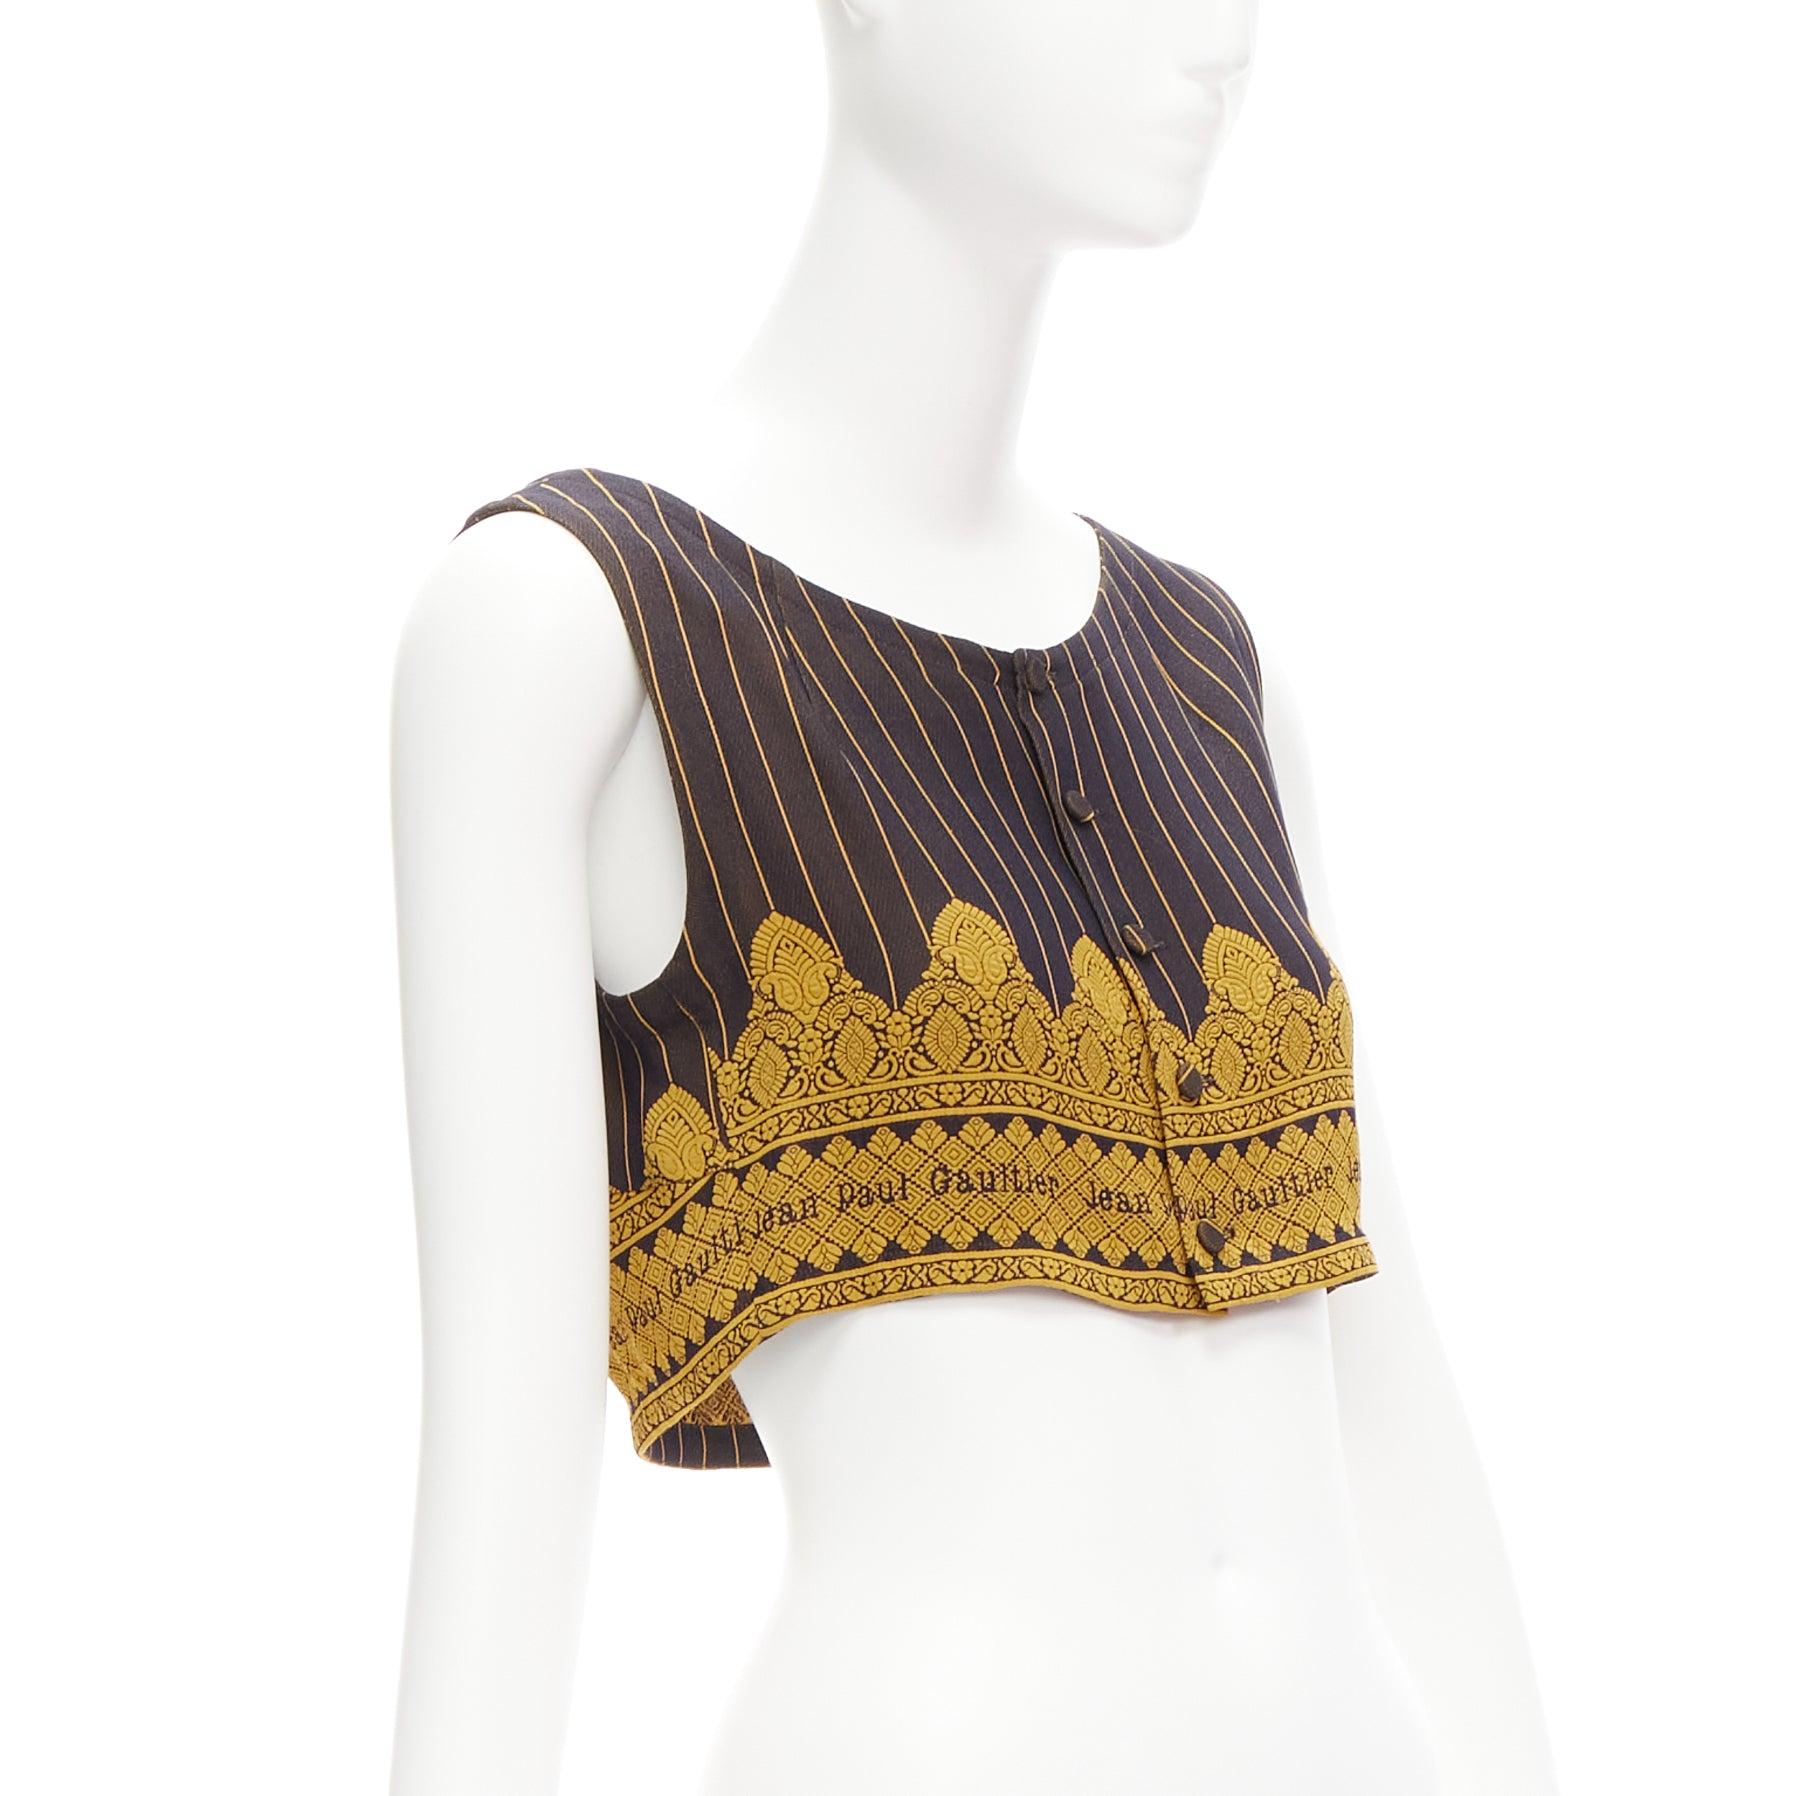 rare JEAN PAUL GAULTIER FEMME Vintage Maharaja brown logo crop top IT40 S
Reference: TGAS/D00999
Brand: Jean Paul Gaultier
Designer: Jean Paul Gaultier
Collection: Femme
Material: Rayon, Blend
Color: Yellow, Brown
Pattern: Ethnic
Closure: